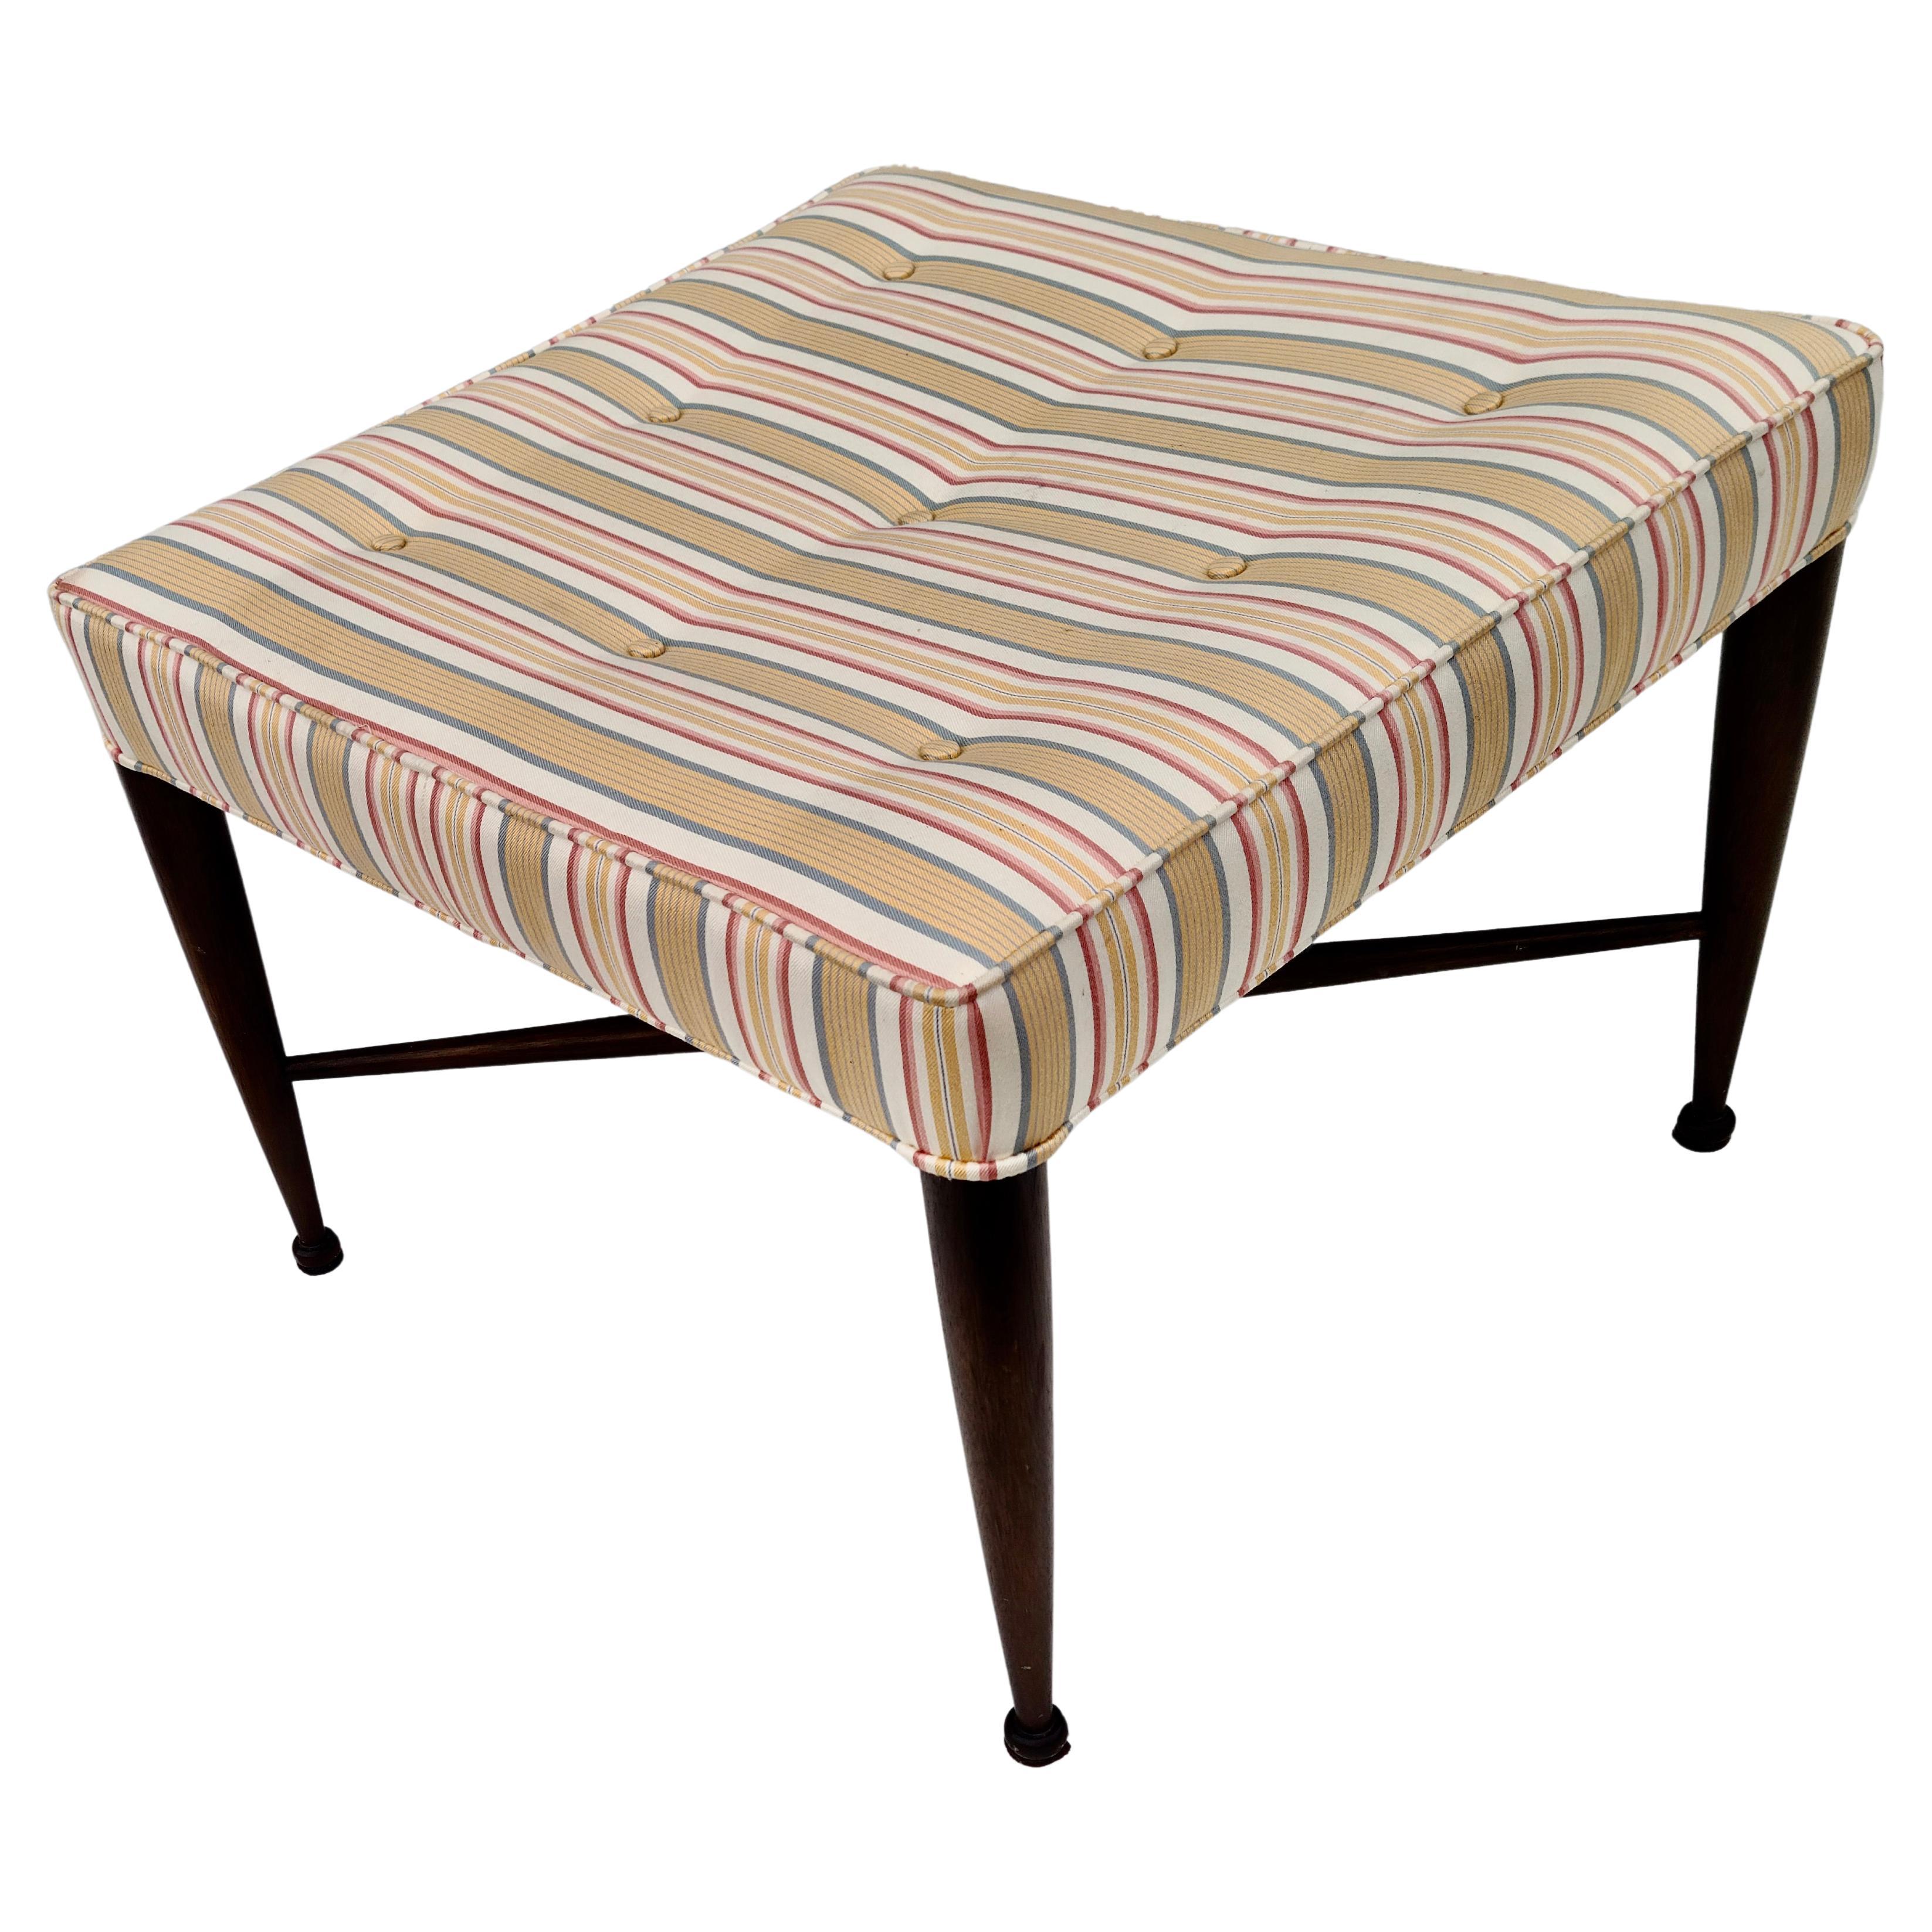 Mid-20th Century Dunbar Thebes Stool designed by Edward Wormley